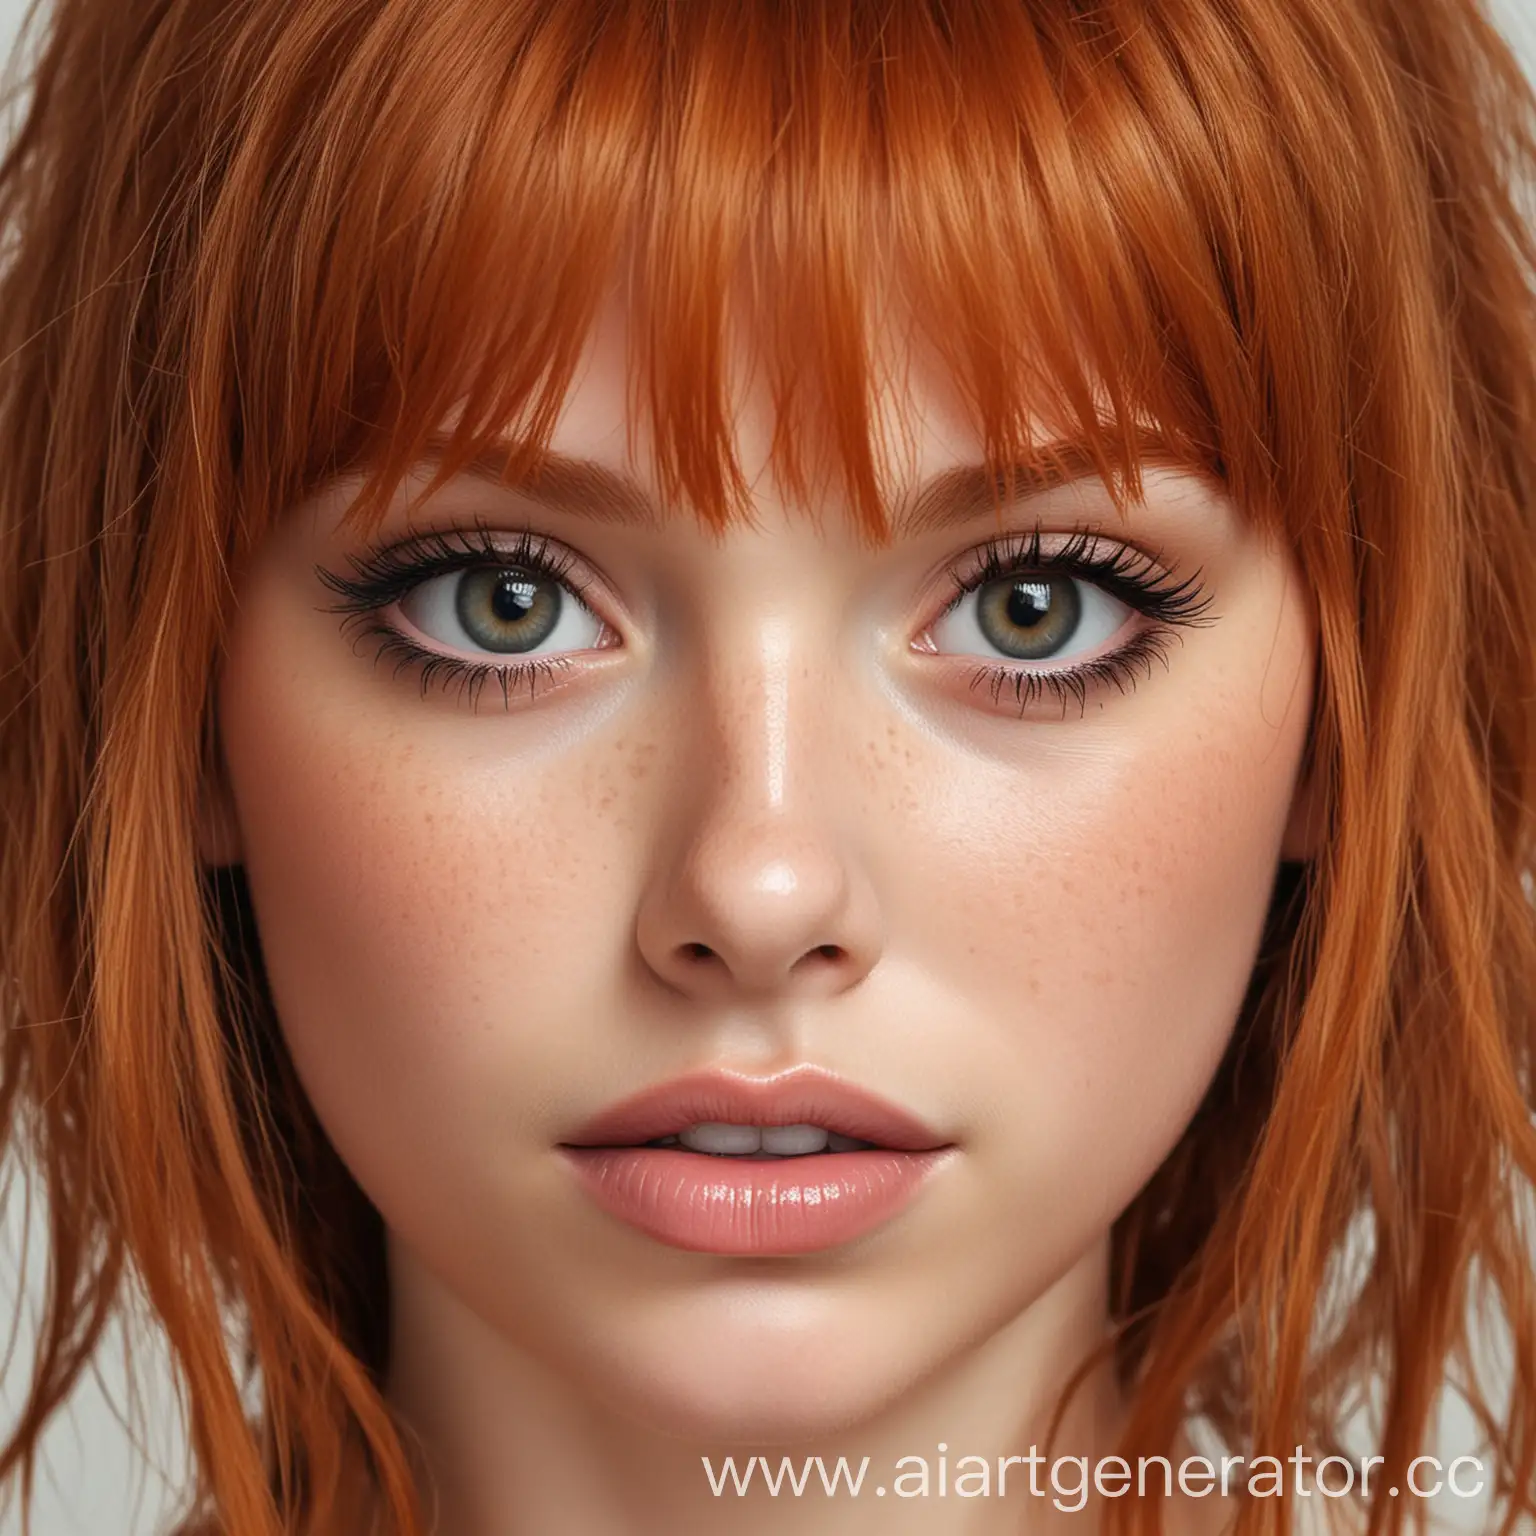 GingerHaired-Girl-with-Black-Contact-Lenses-and-Fringe-Sennty7-Lip-Art